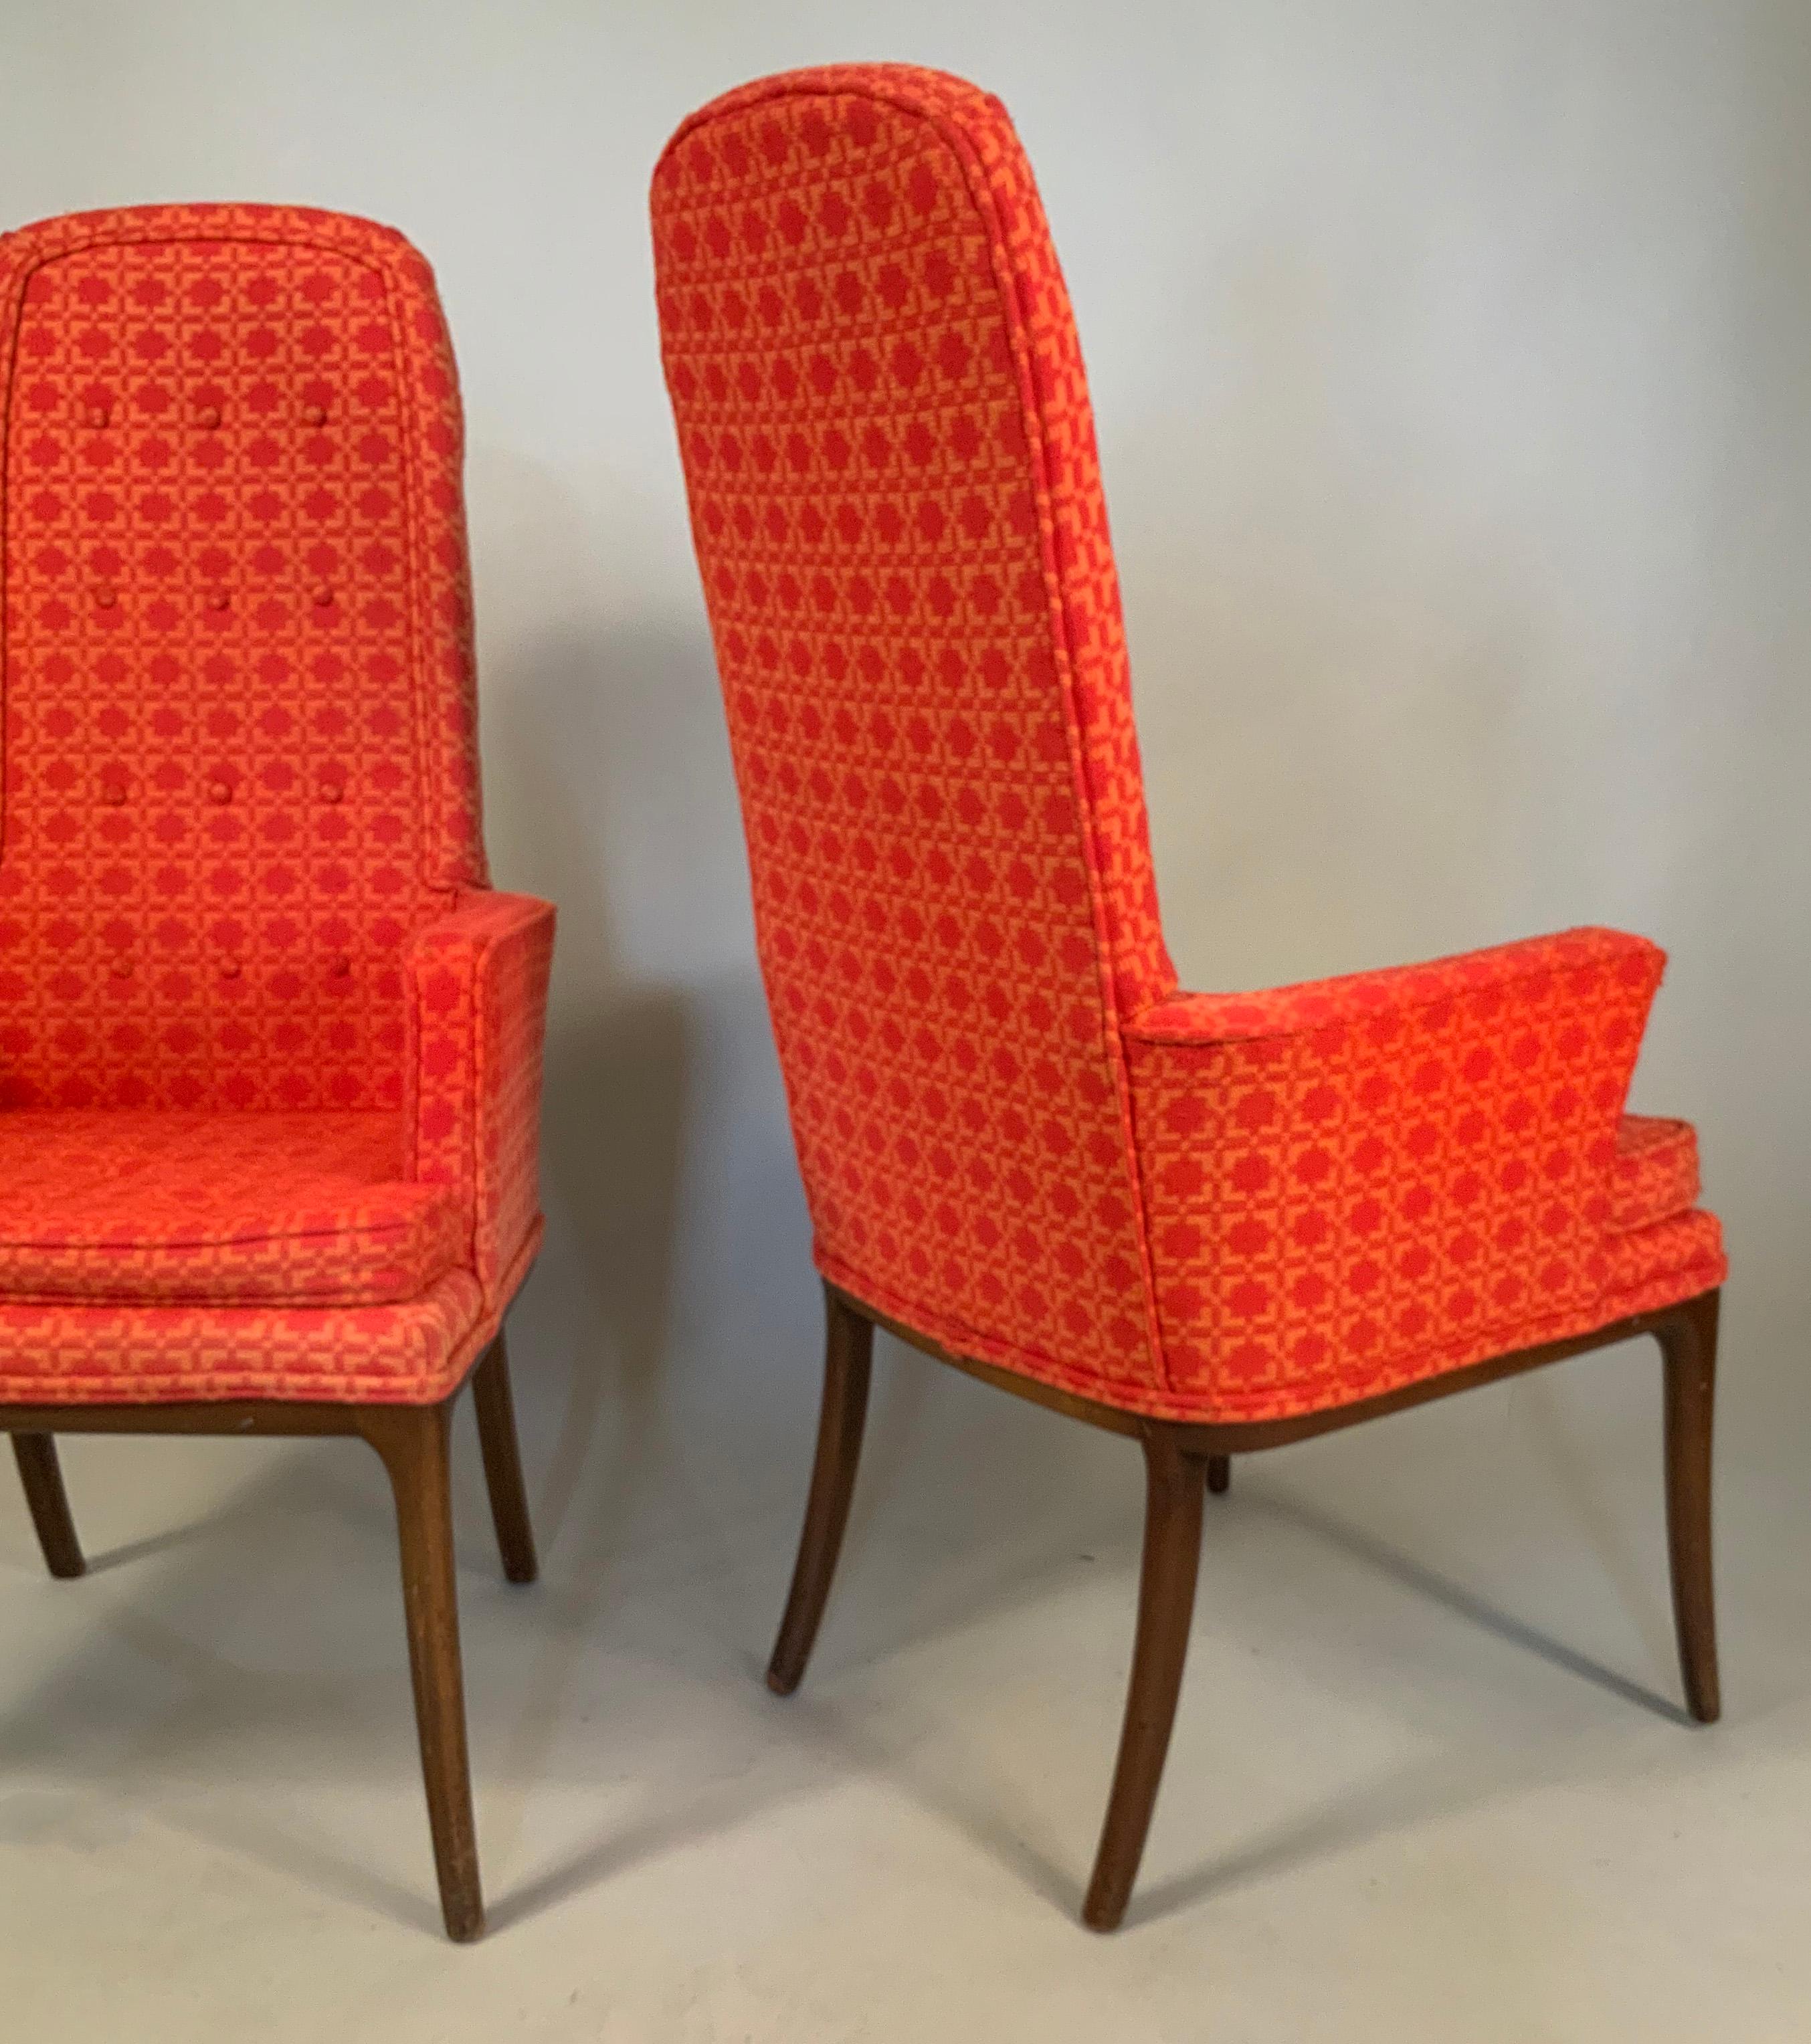 Upholstery Pair of Elegant High Back Armchairs by Erwin Lambeth